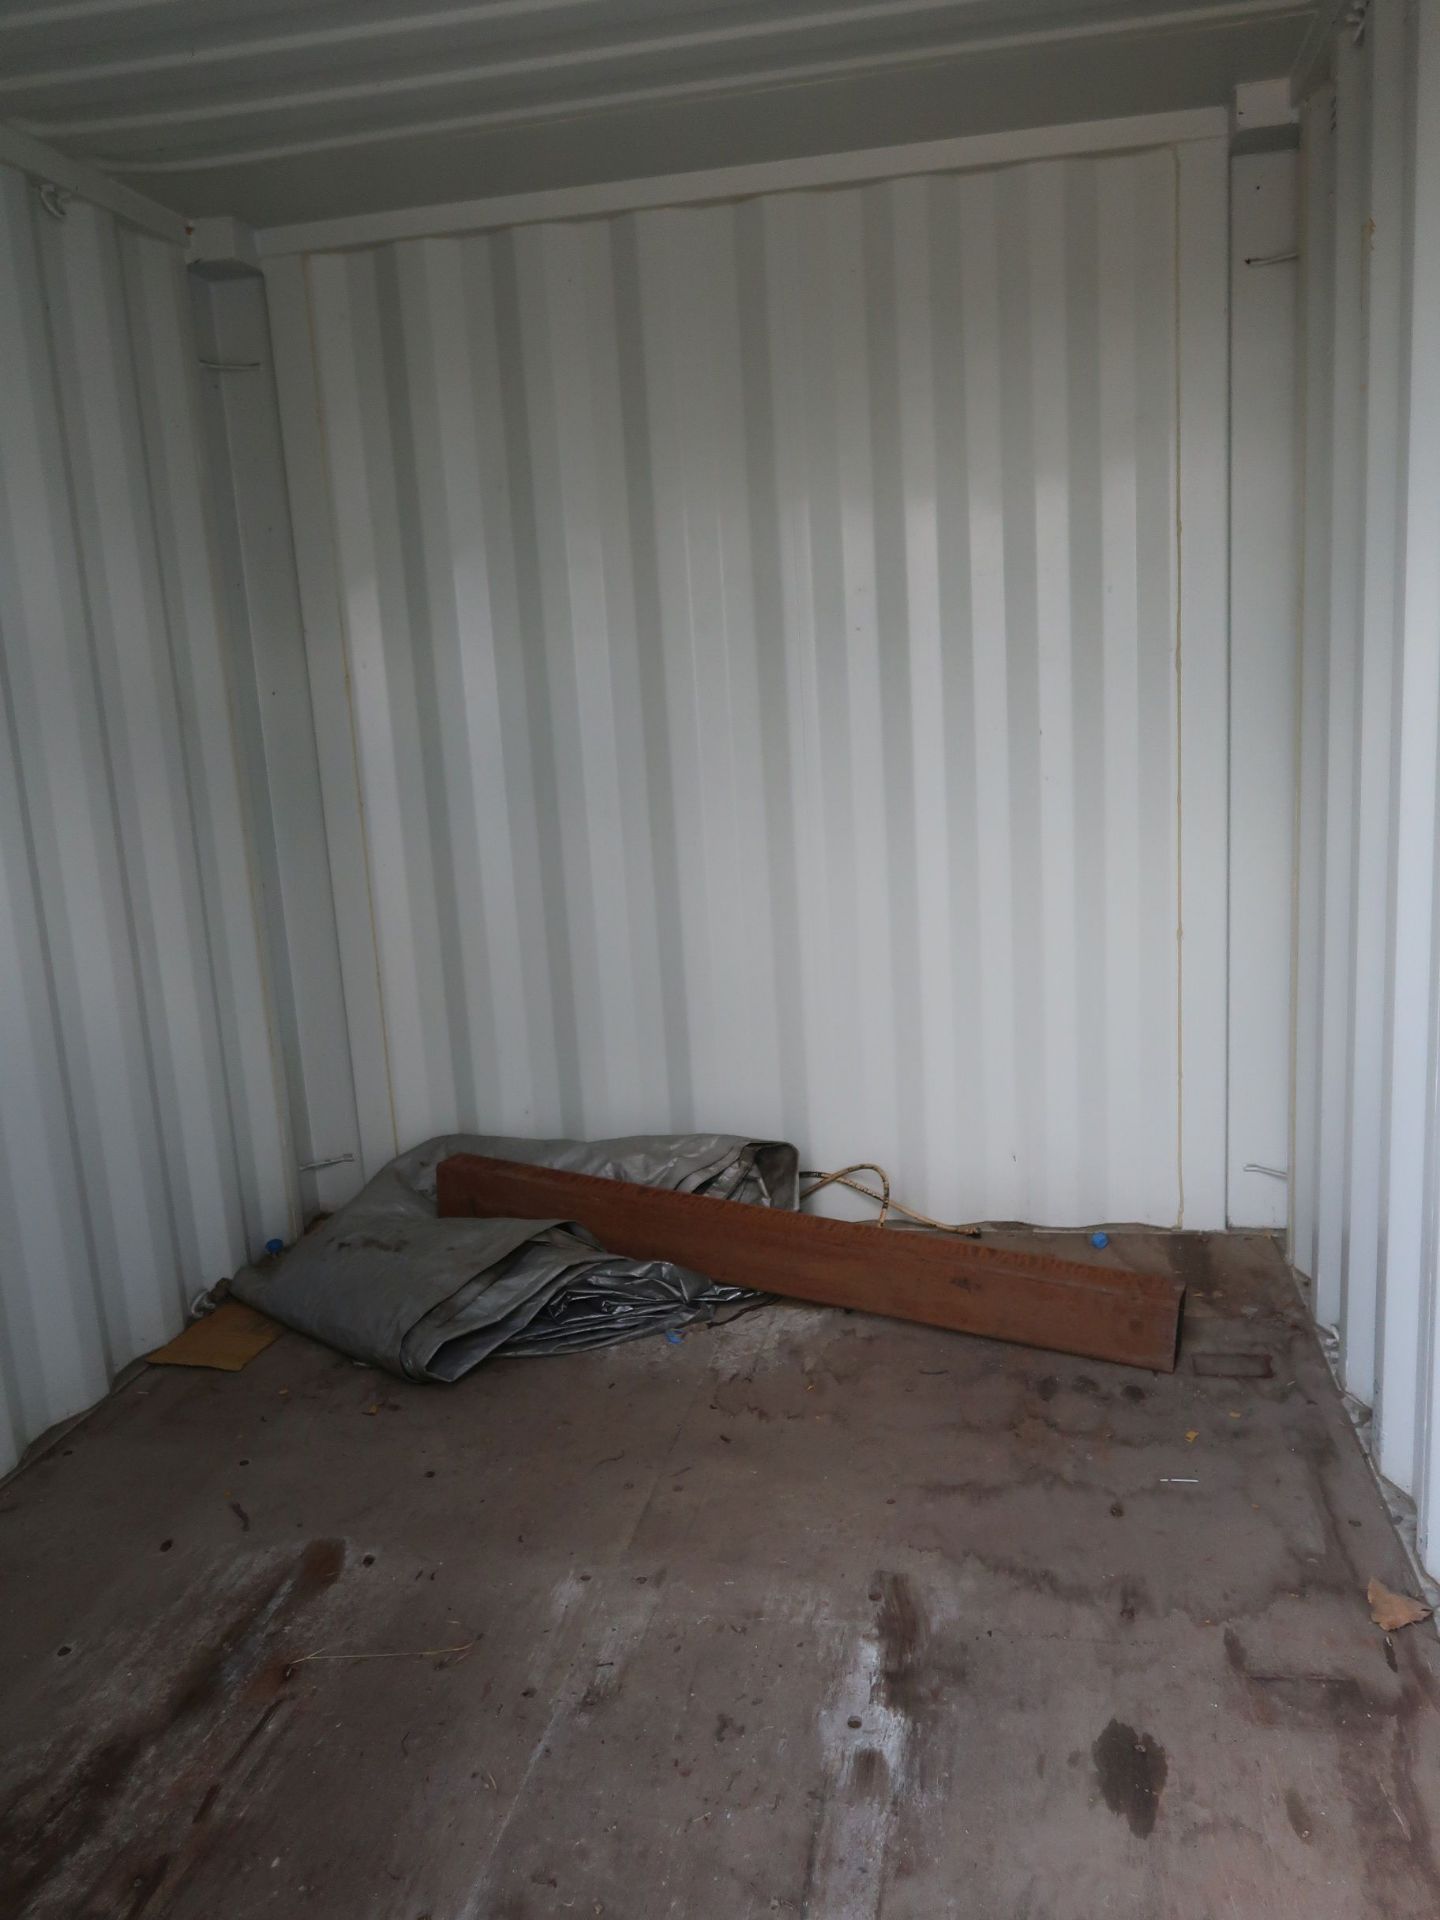 7' X 8' CONTAINER PROVIDER INTL CONEX STORAGE CONTAINER, 563 CUBIC FEET - Image 2 of 3